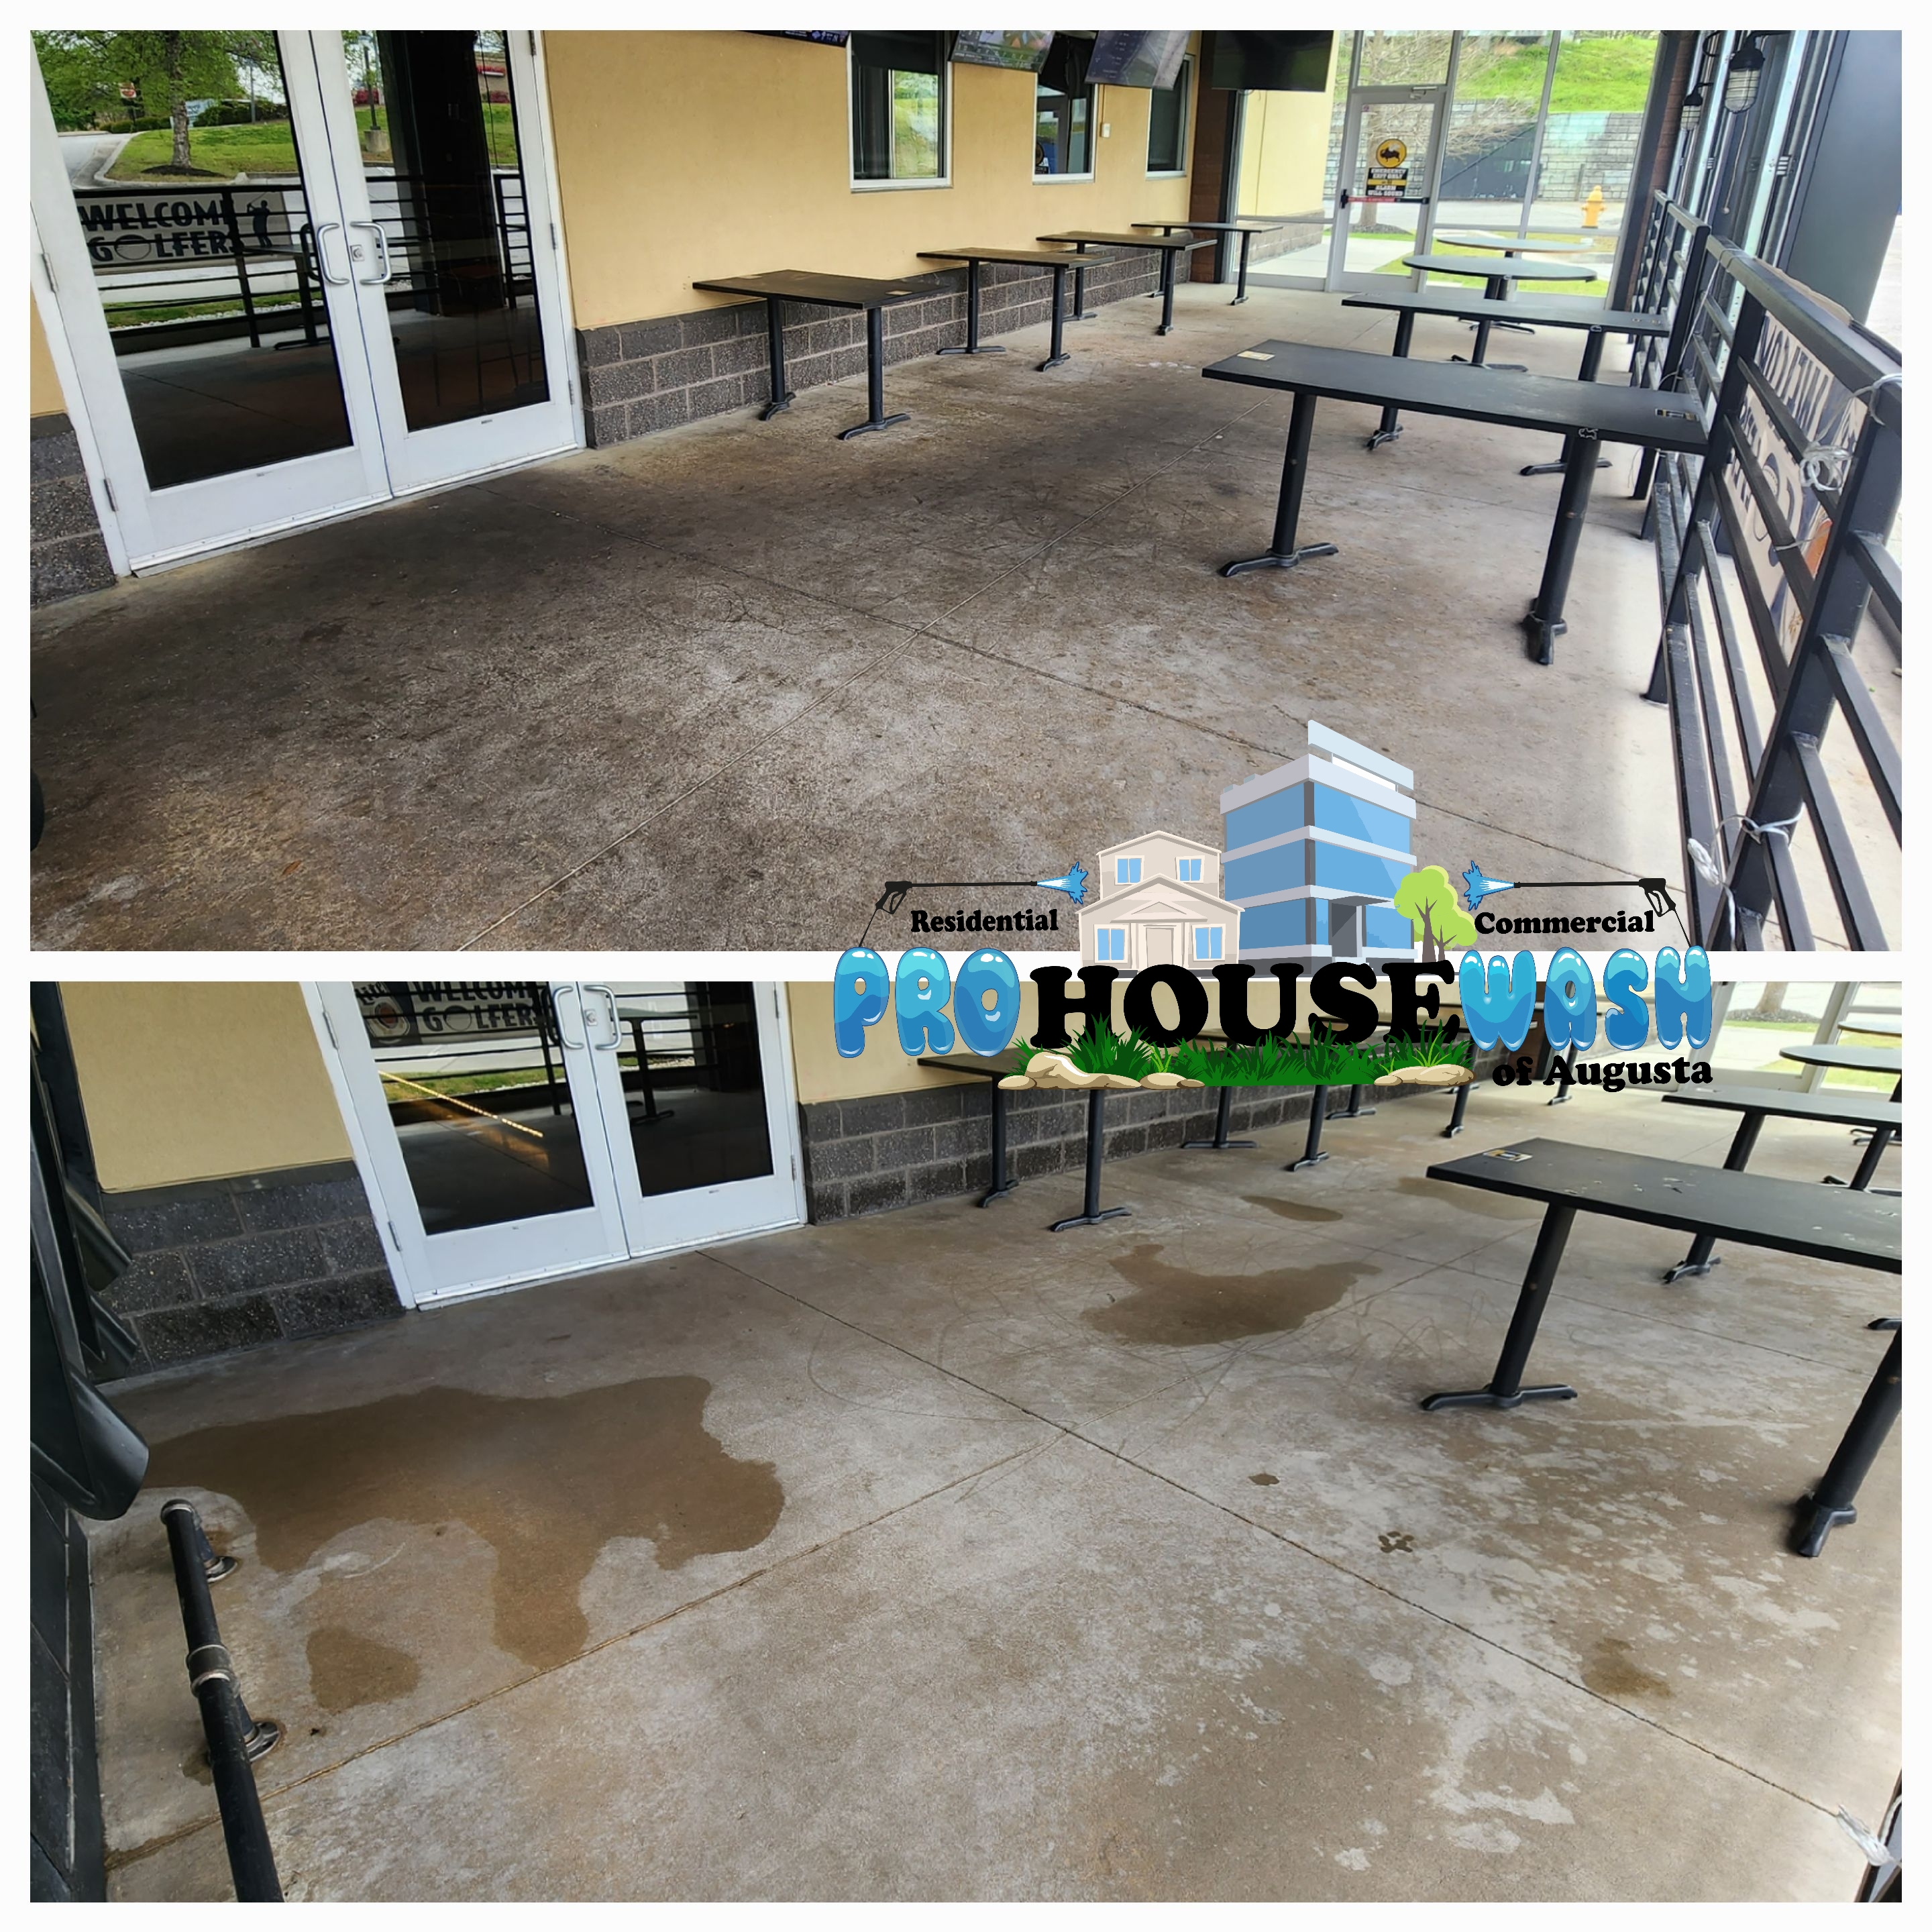 Commercial Pressure Washing for Buffalo Wild Wings in Augusta, GA